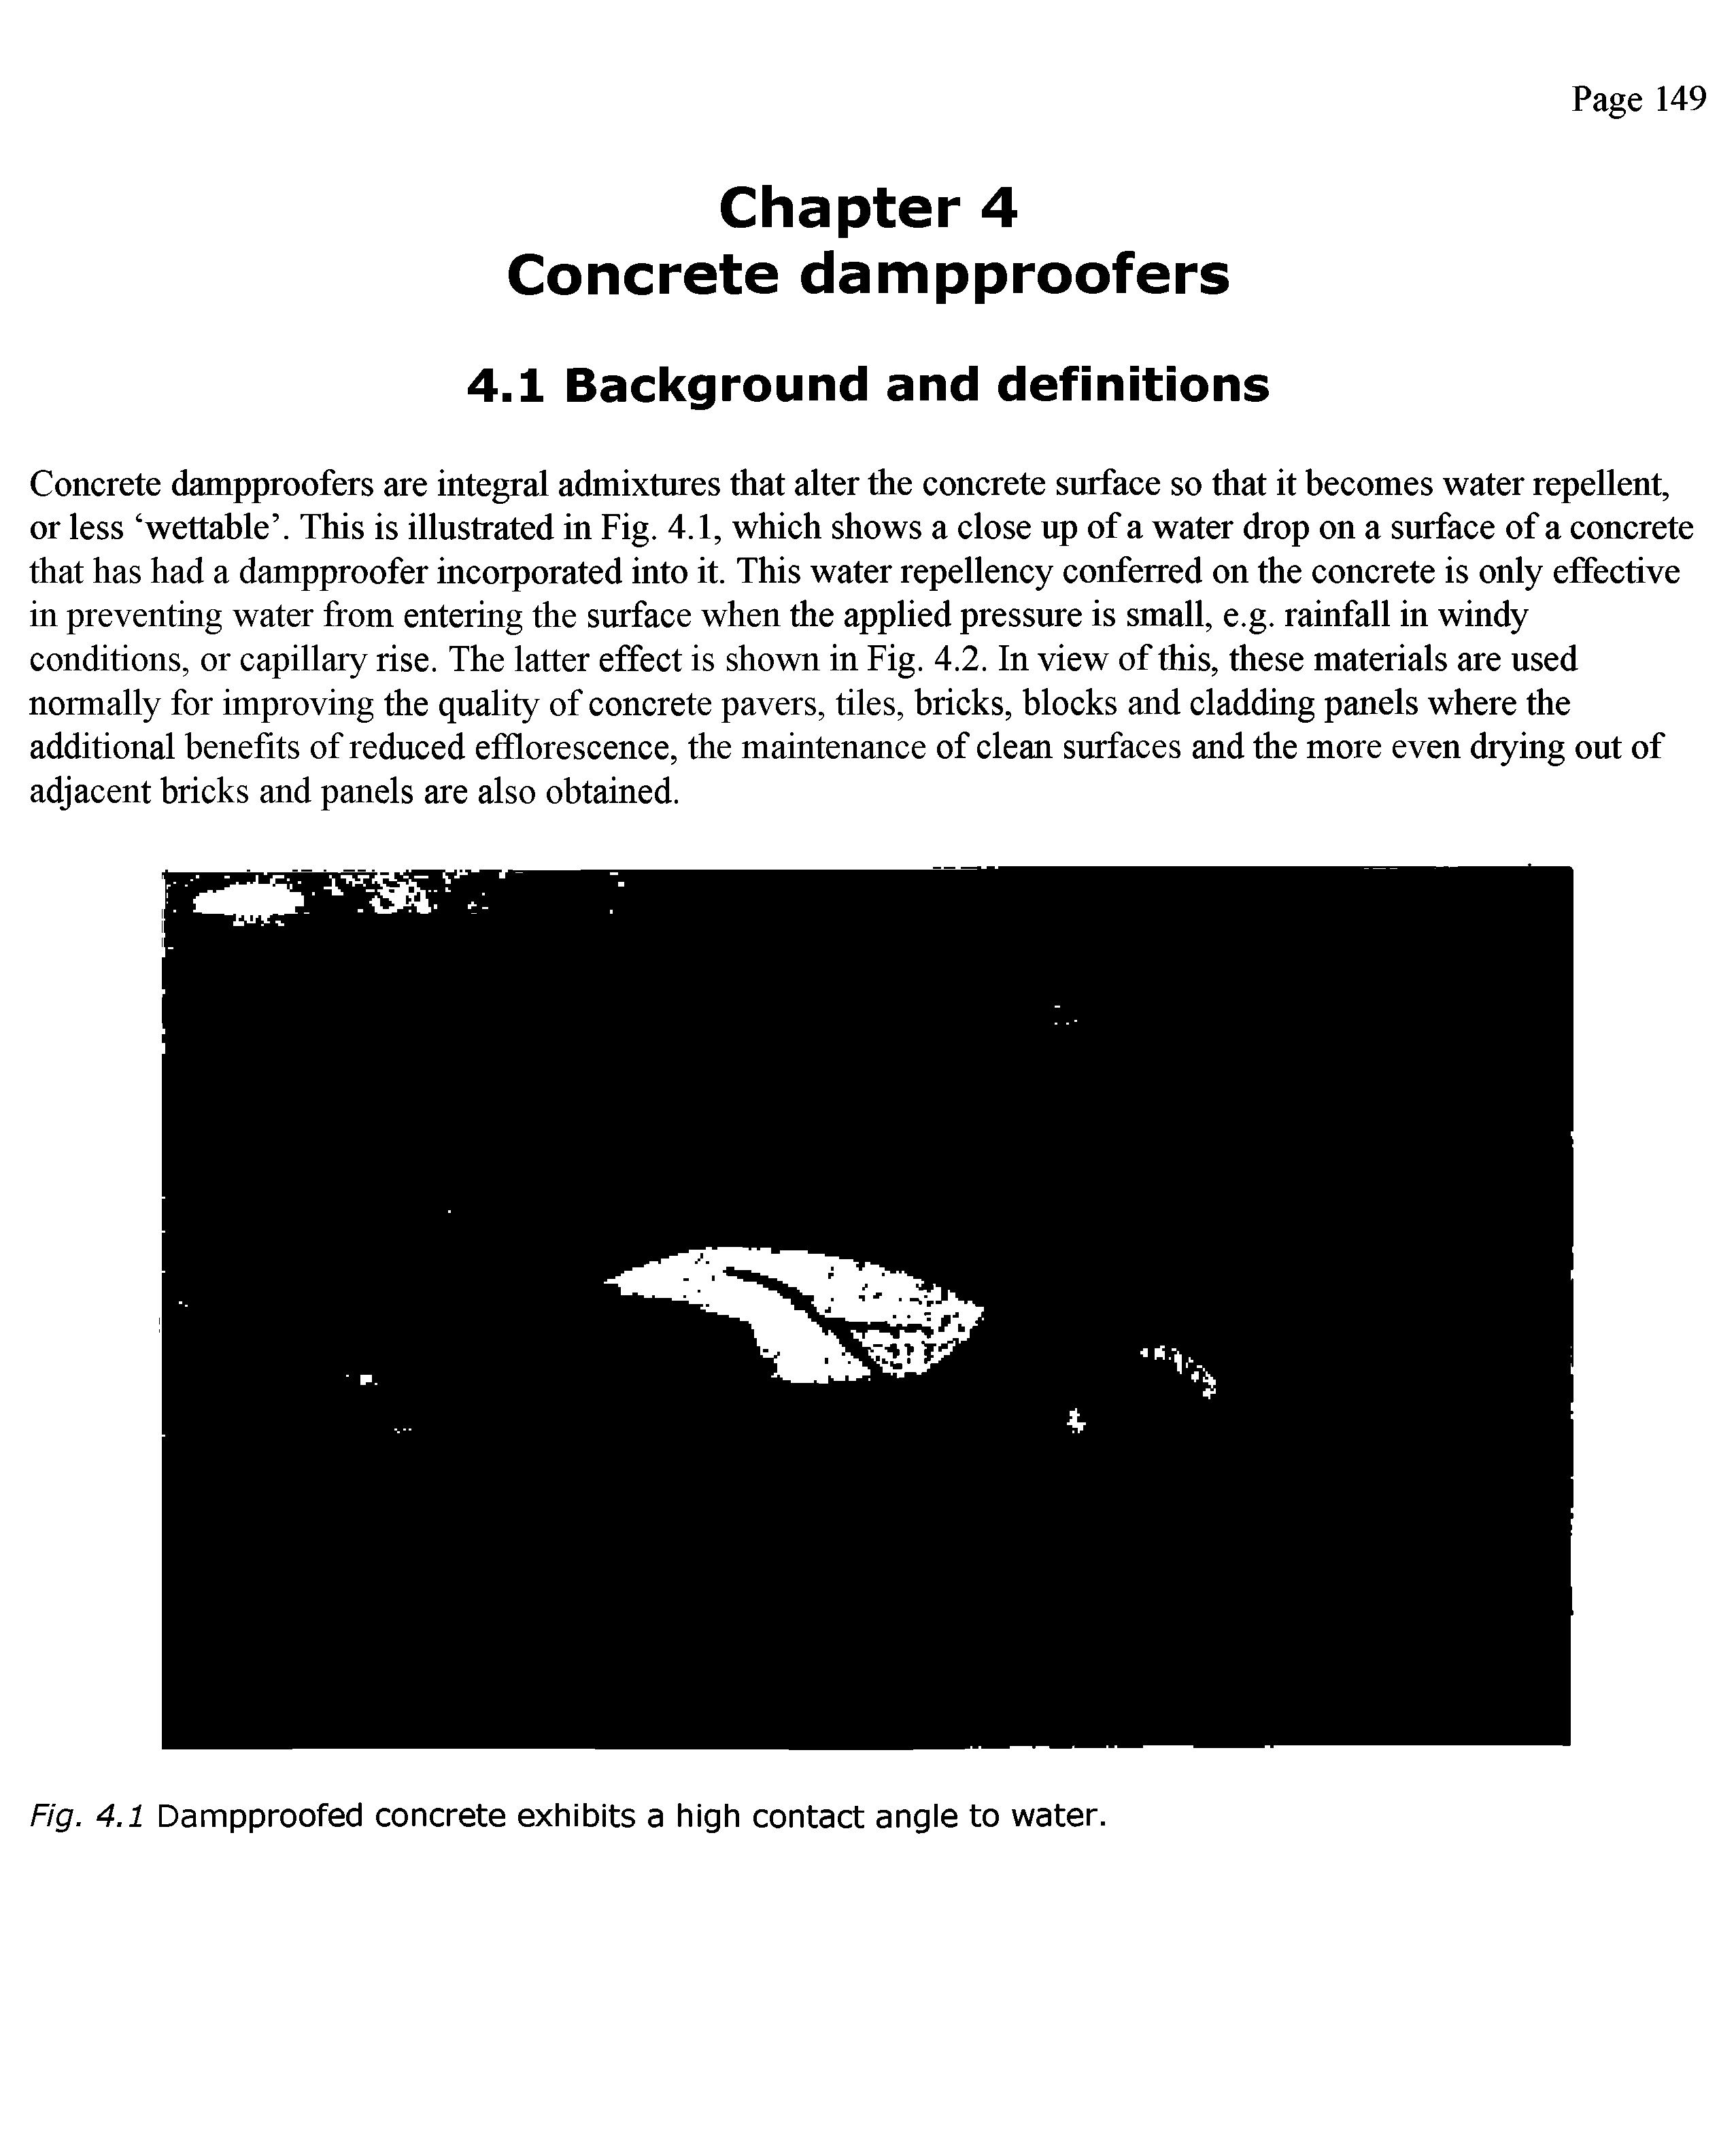 Fig. 4.1 Dampproofed concrete exhibits a high contact angle to water.